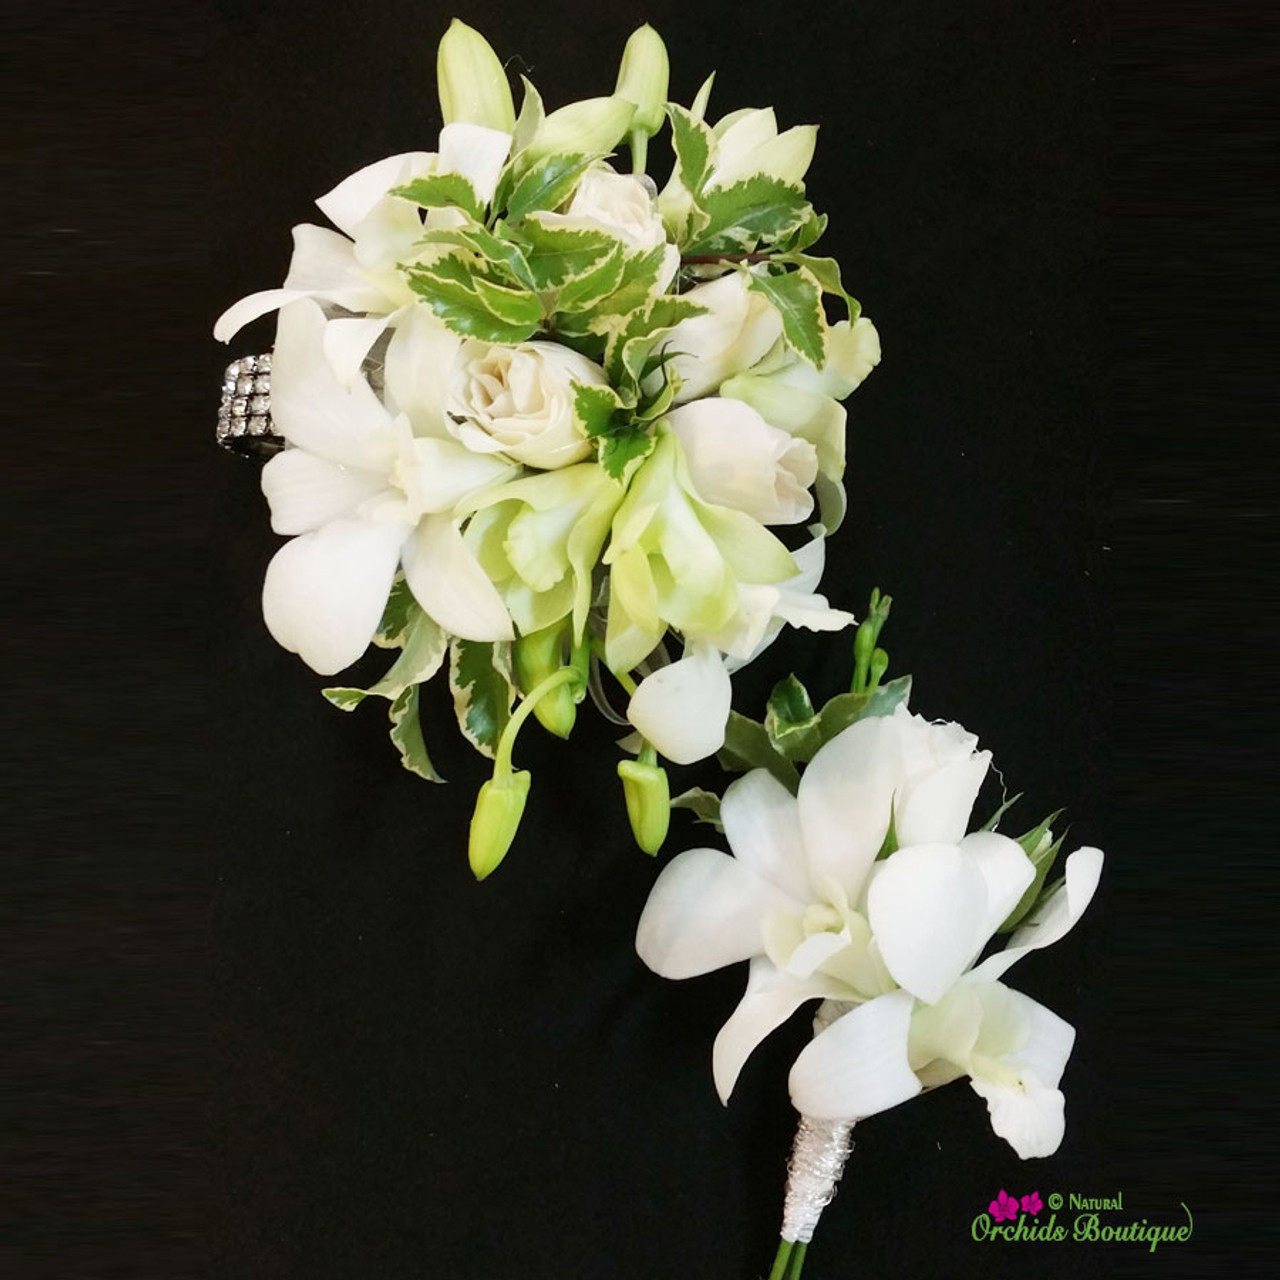 white orchid corsage boutonniere